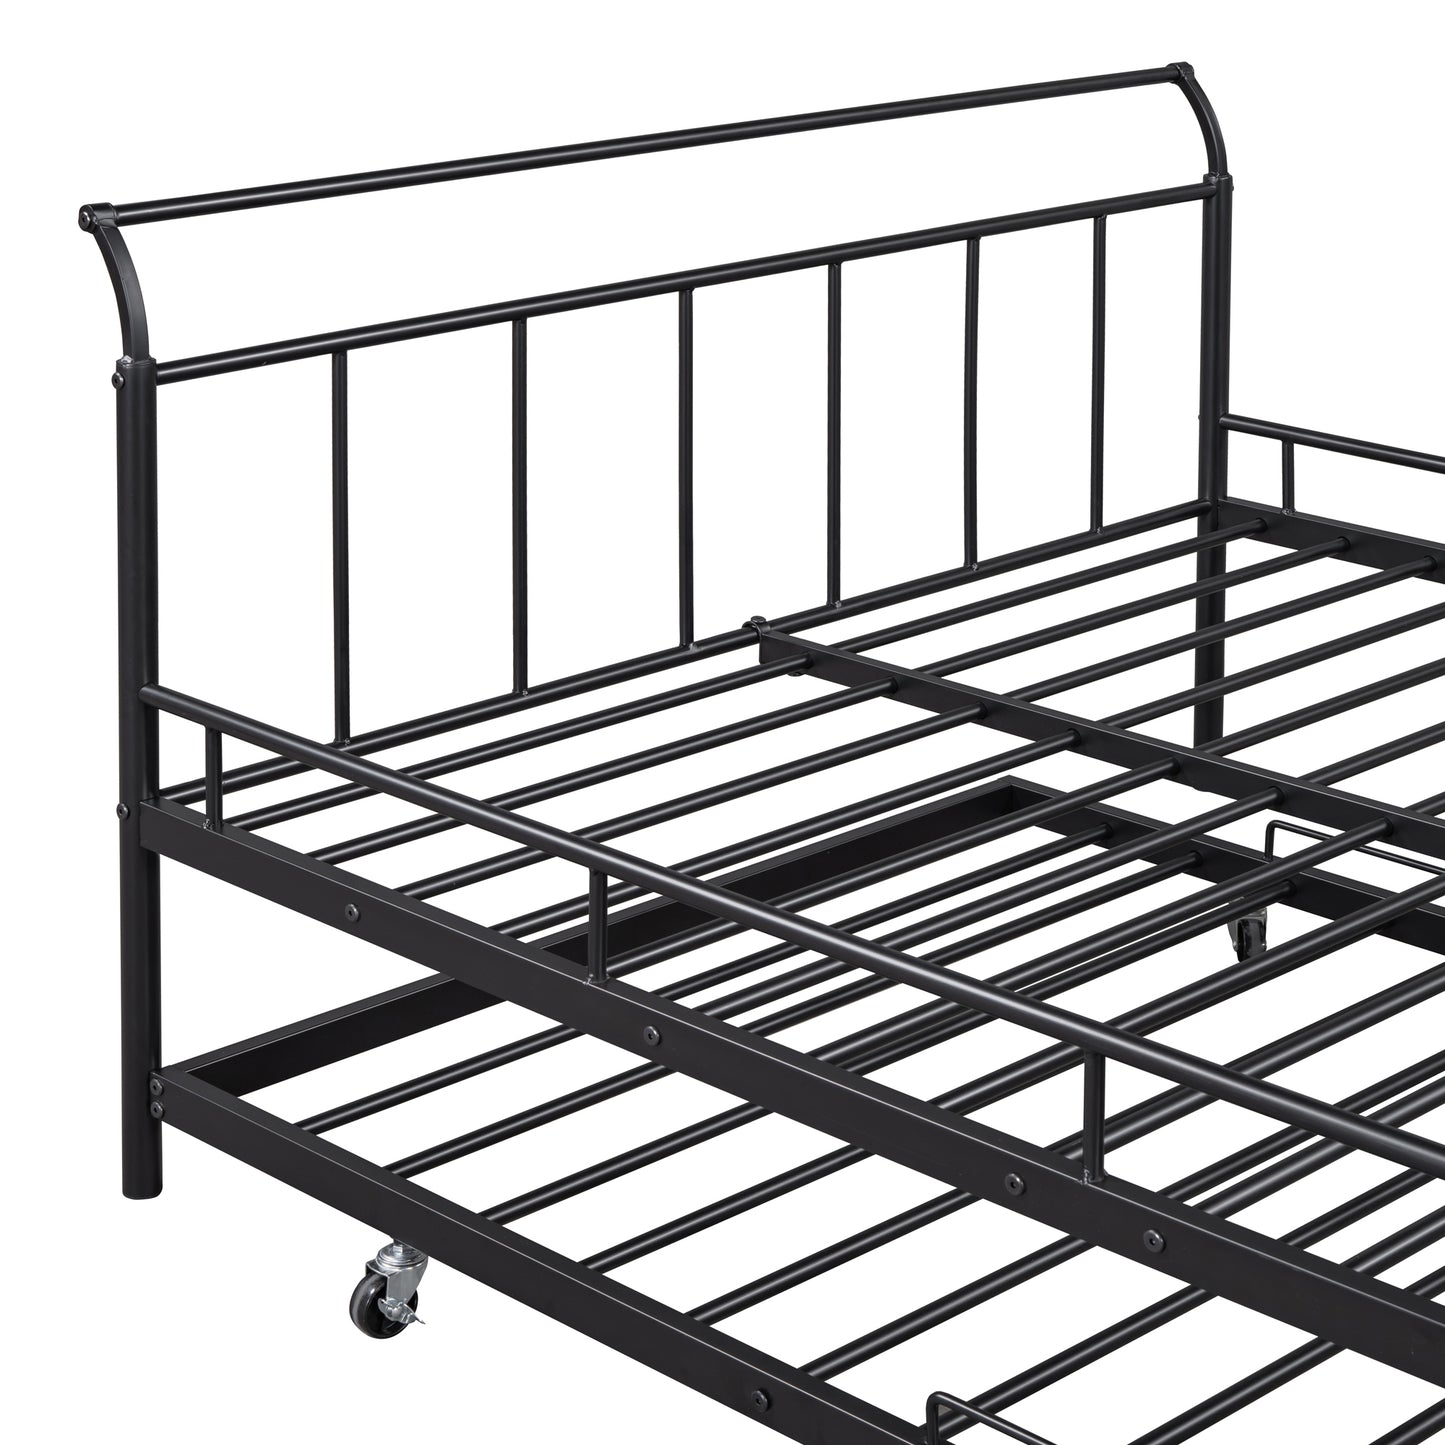 Full Size Metal Daybed with Curved Handle Design and Twin Size Trundle, Black